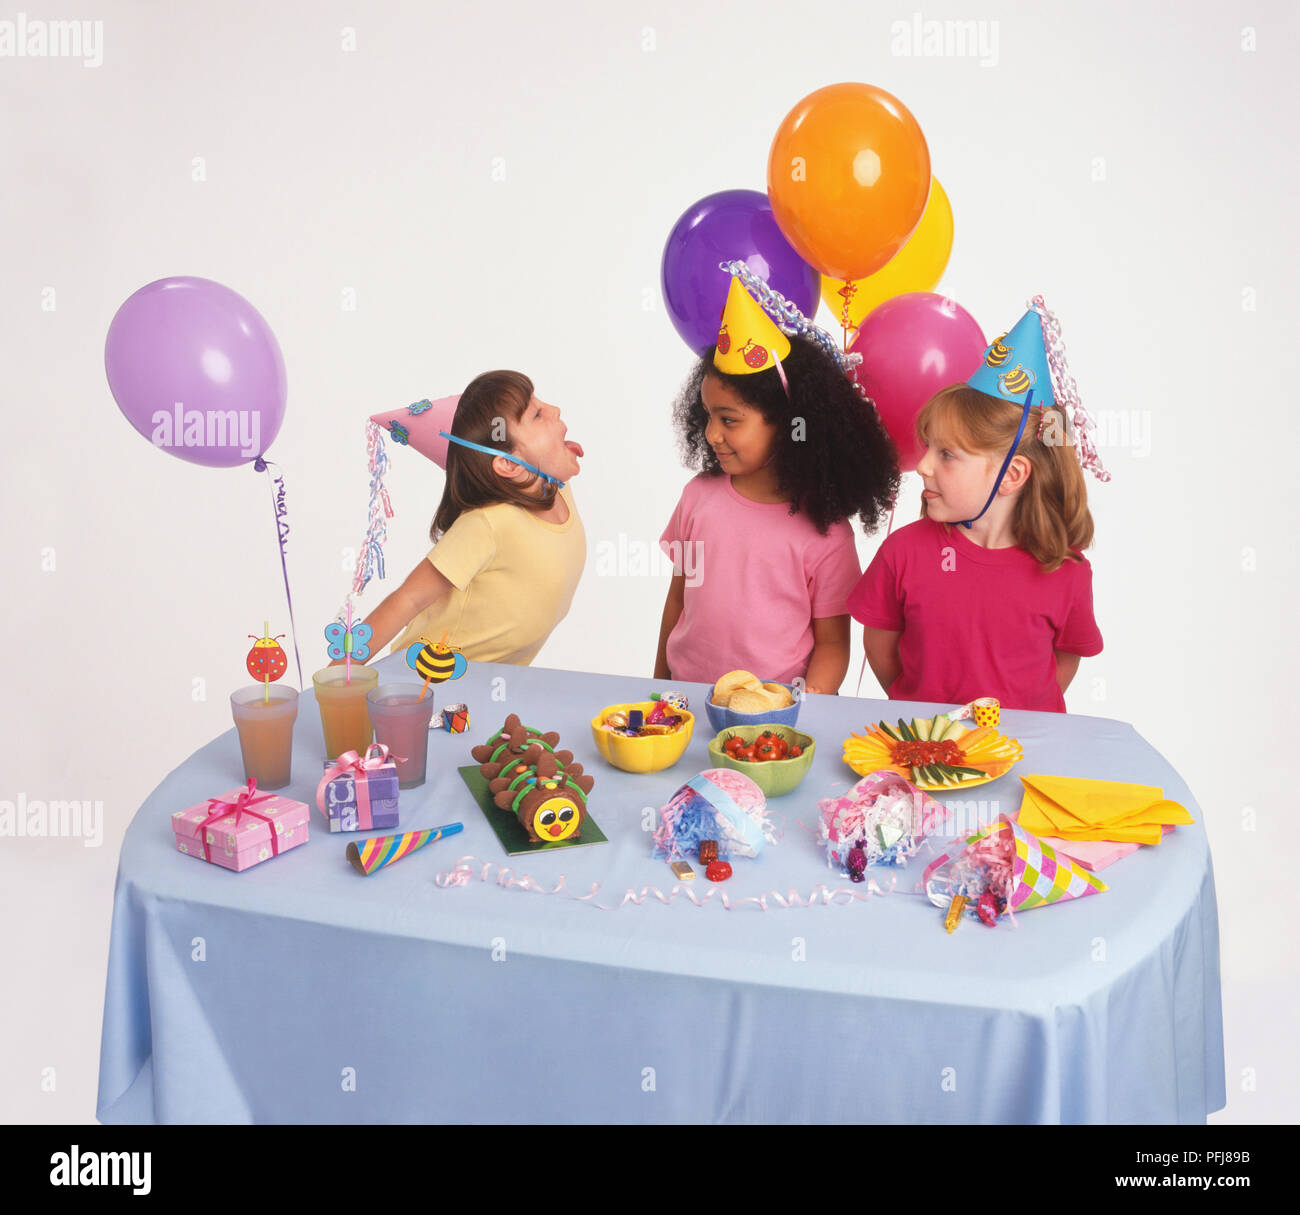 Girl in party hat sticking tongue out at two other girls, all standing behind table decorated for birthday party. Stock Photo